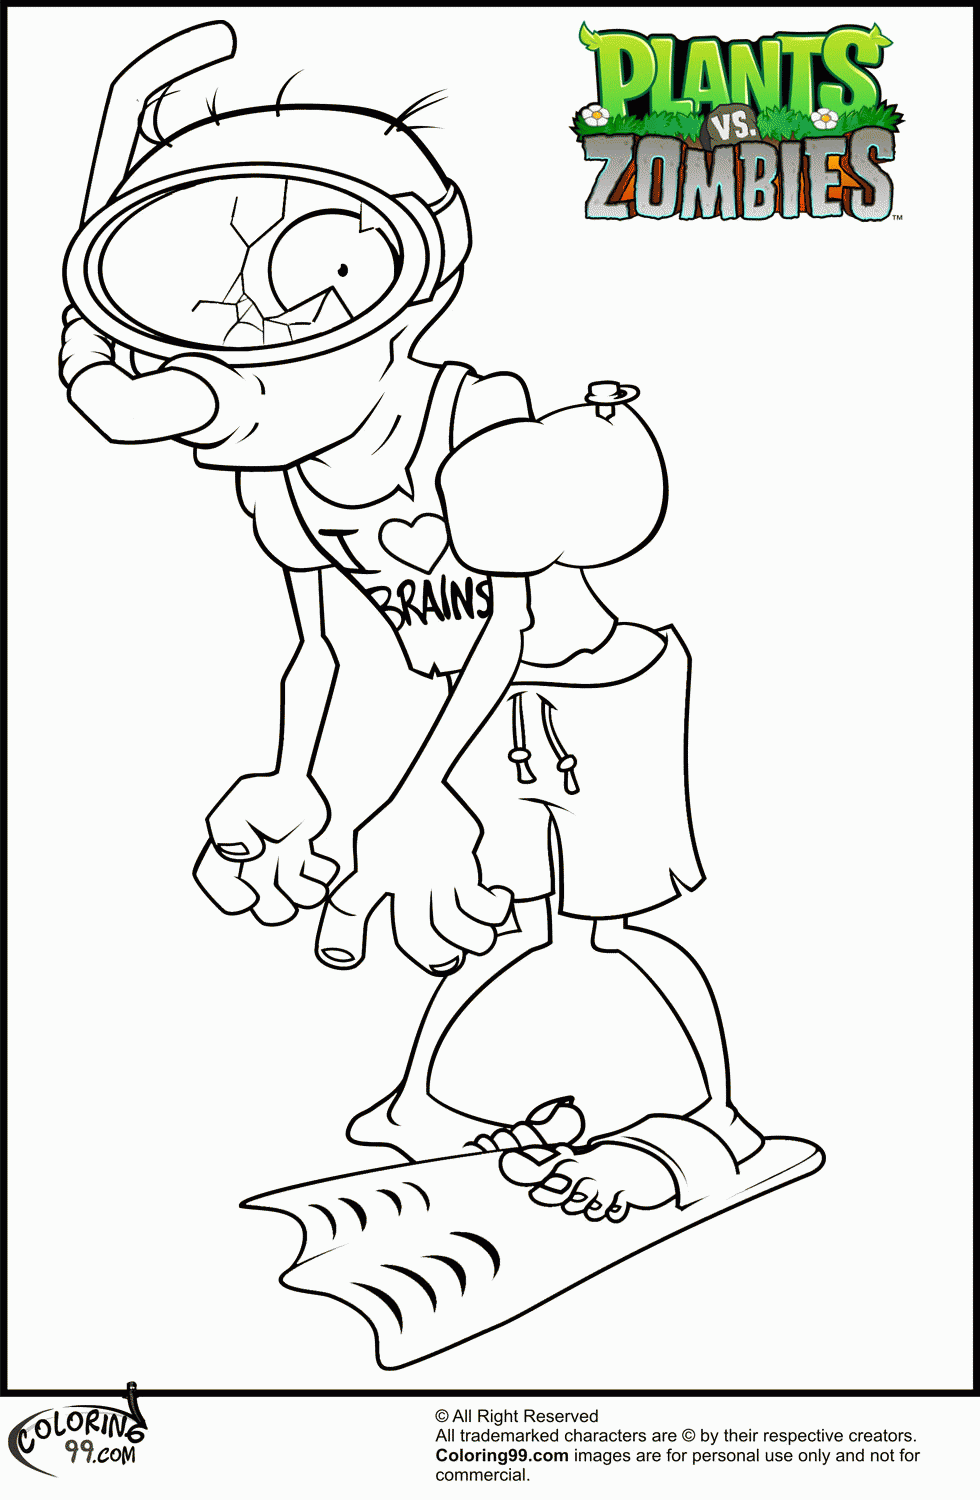 Free Plants Vs Zombies Zombie Coloring Pages, Download Free Plants Vs  Zombies Zombie Coloring Pages png images, Free ClipArts on Clipart Library